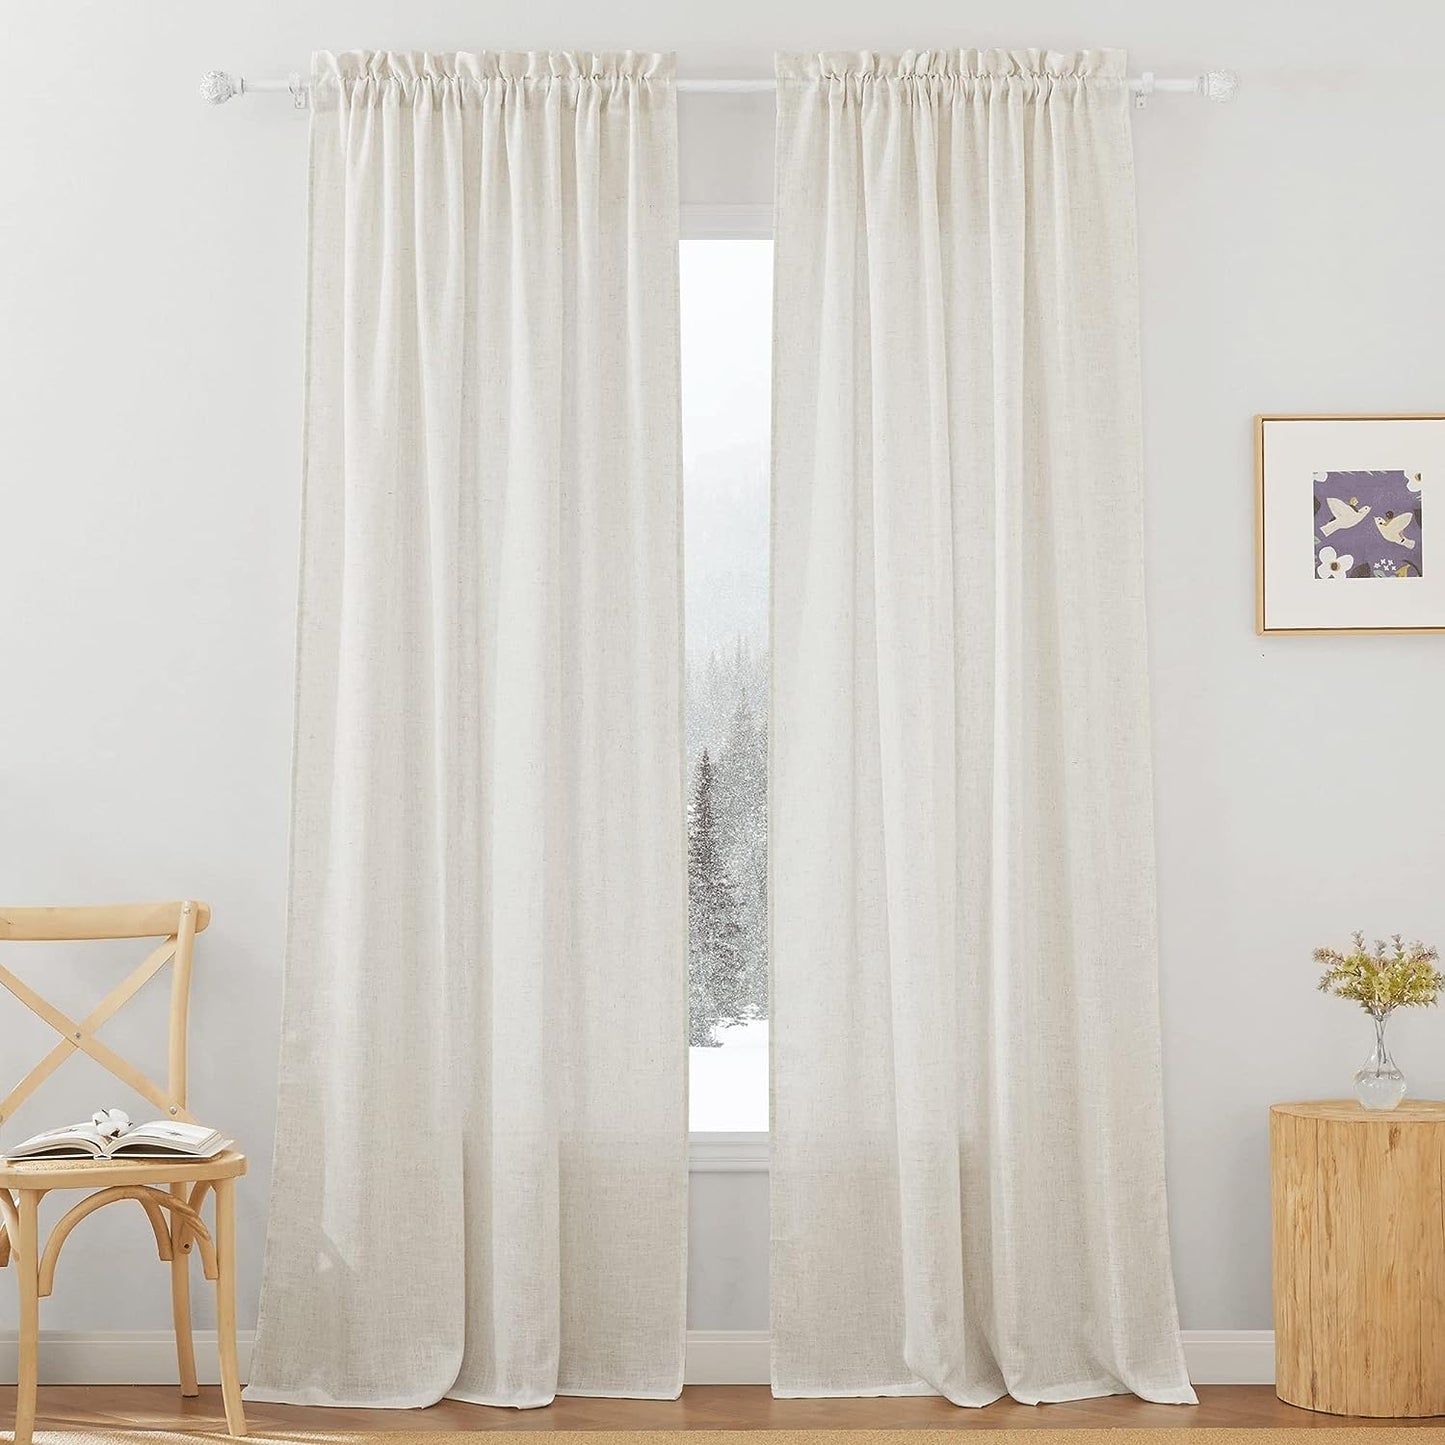 RYB HOME Linen Sheer Curtains 84 Inches Long, Semi Sheer Curtains for Living Room Bedroom Privacy Soften Sunlight Drapes for Farmhouse Cafe, W 52 X L 84, Linen, 2 Panels  RYB HOME   